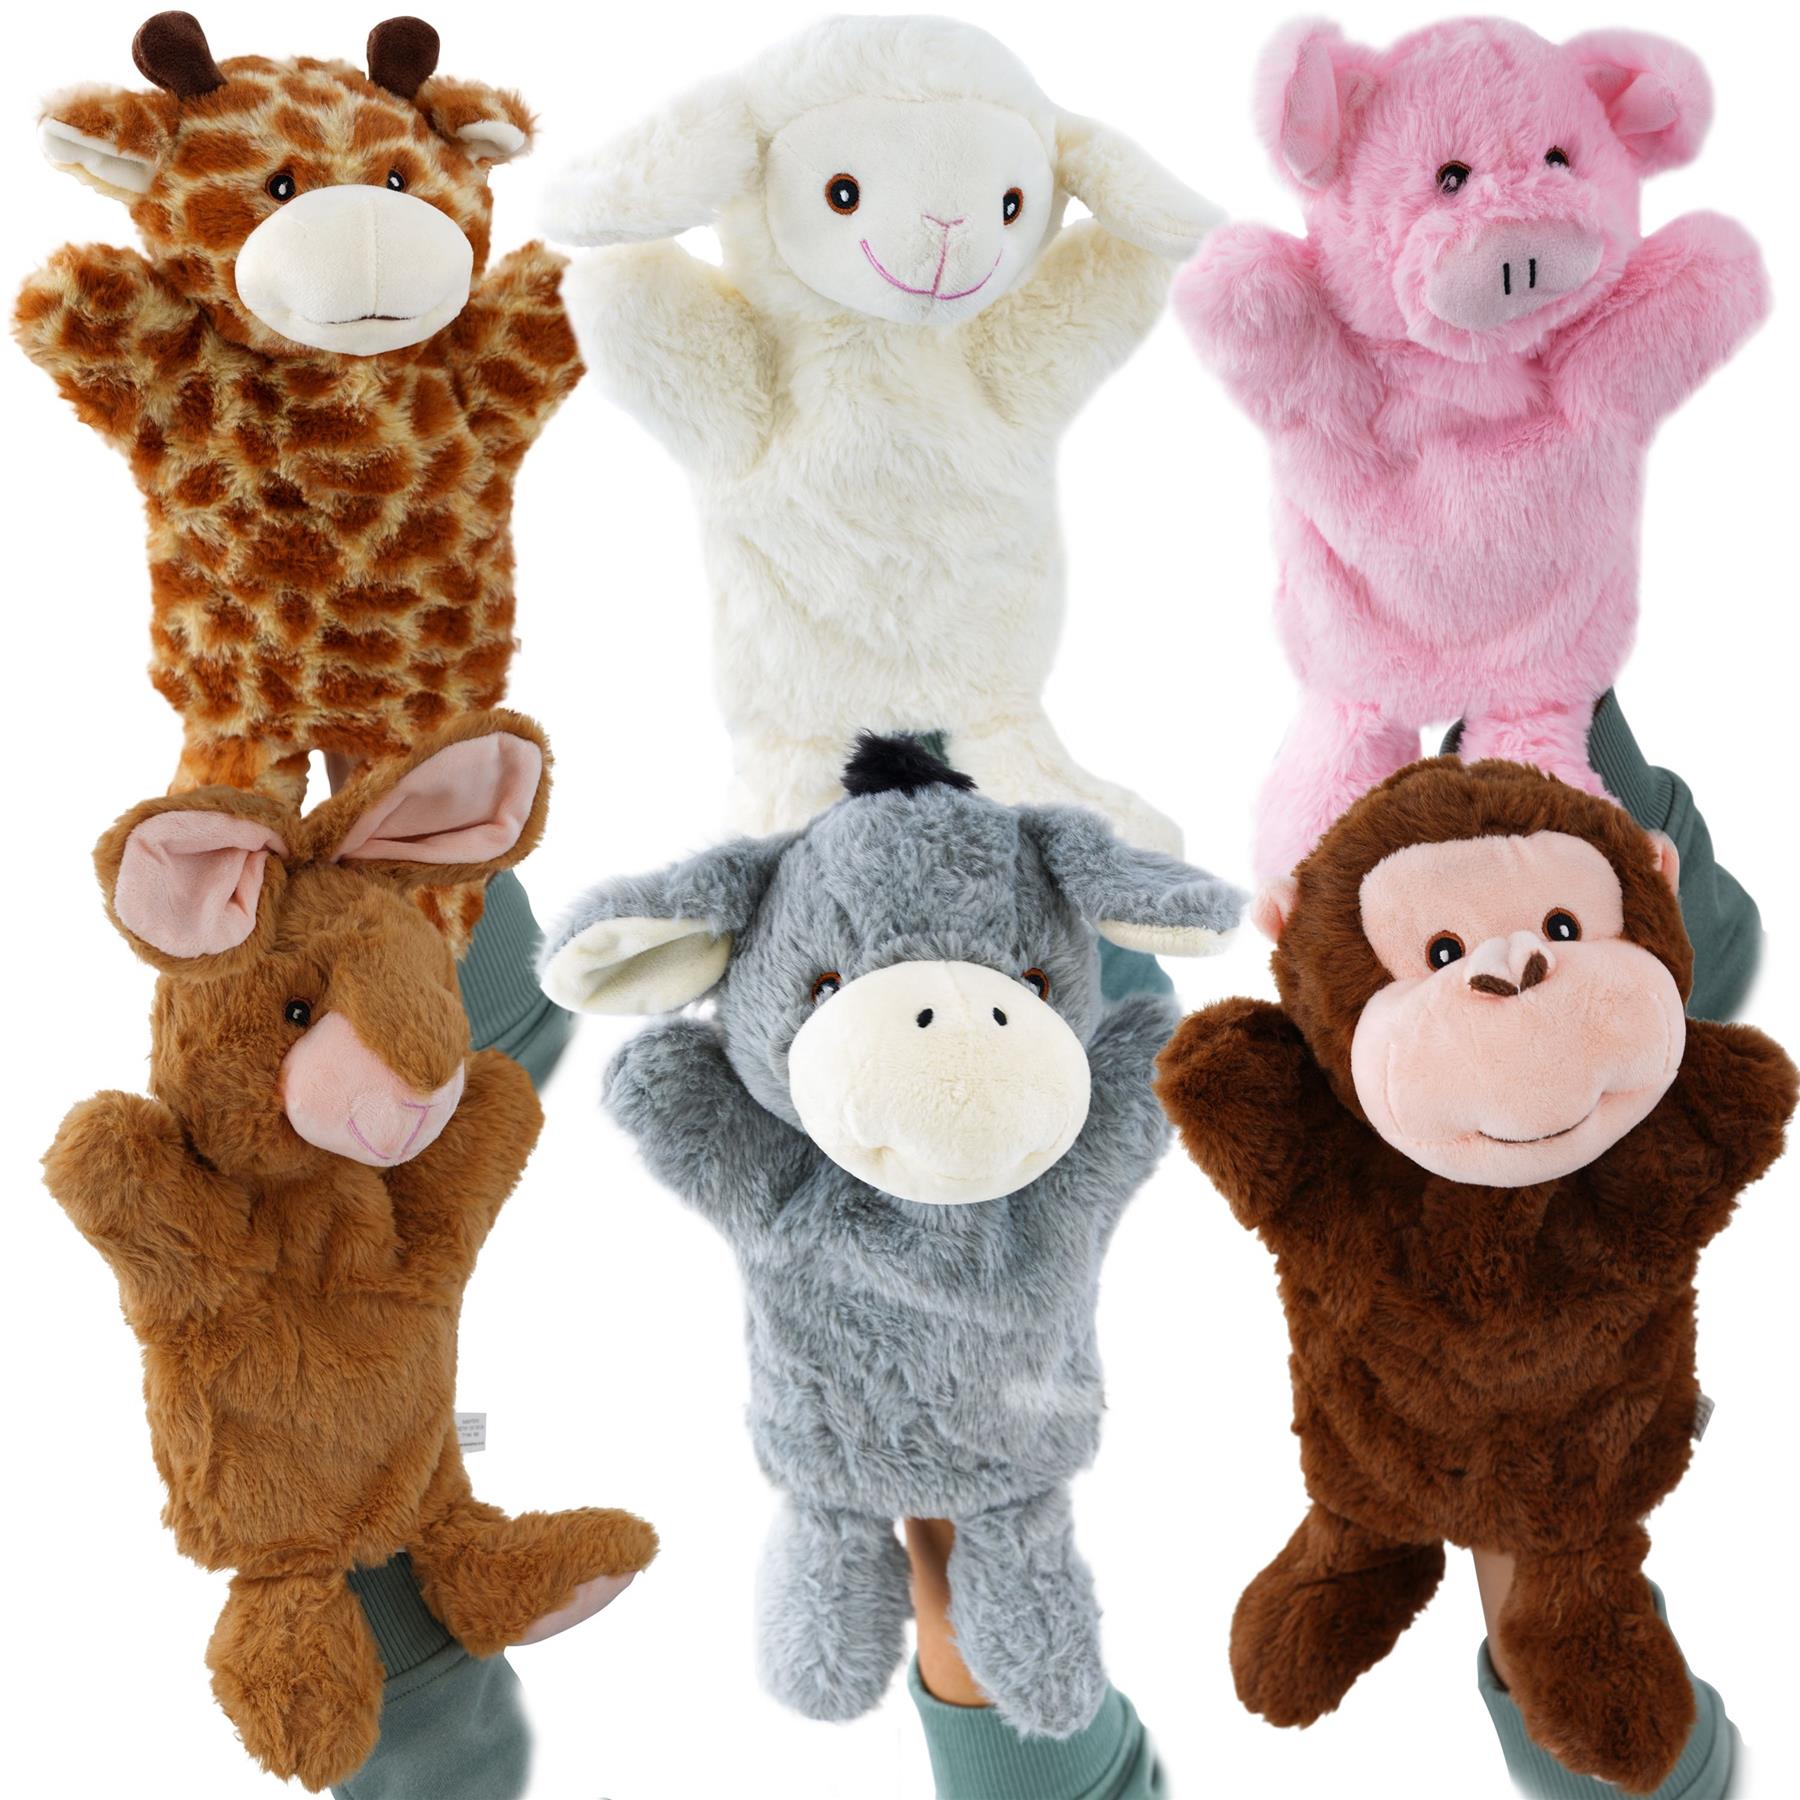 Set Of 6 Animal Hand Puppets For Story Telling & Acts by The Magic Toy Shop - The Magic Toy Shop